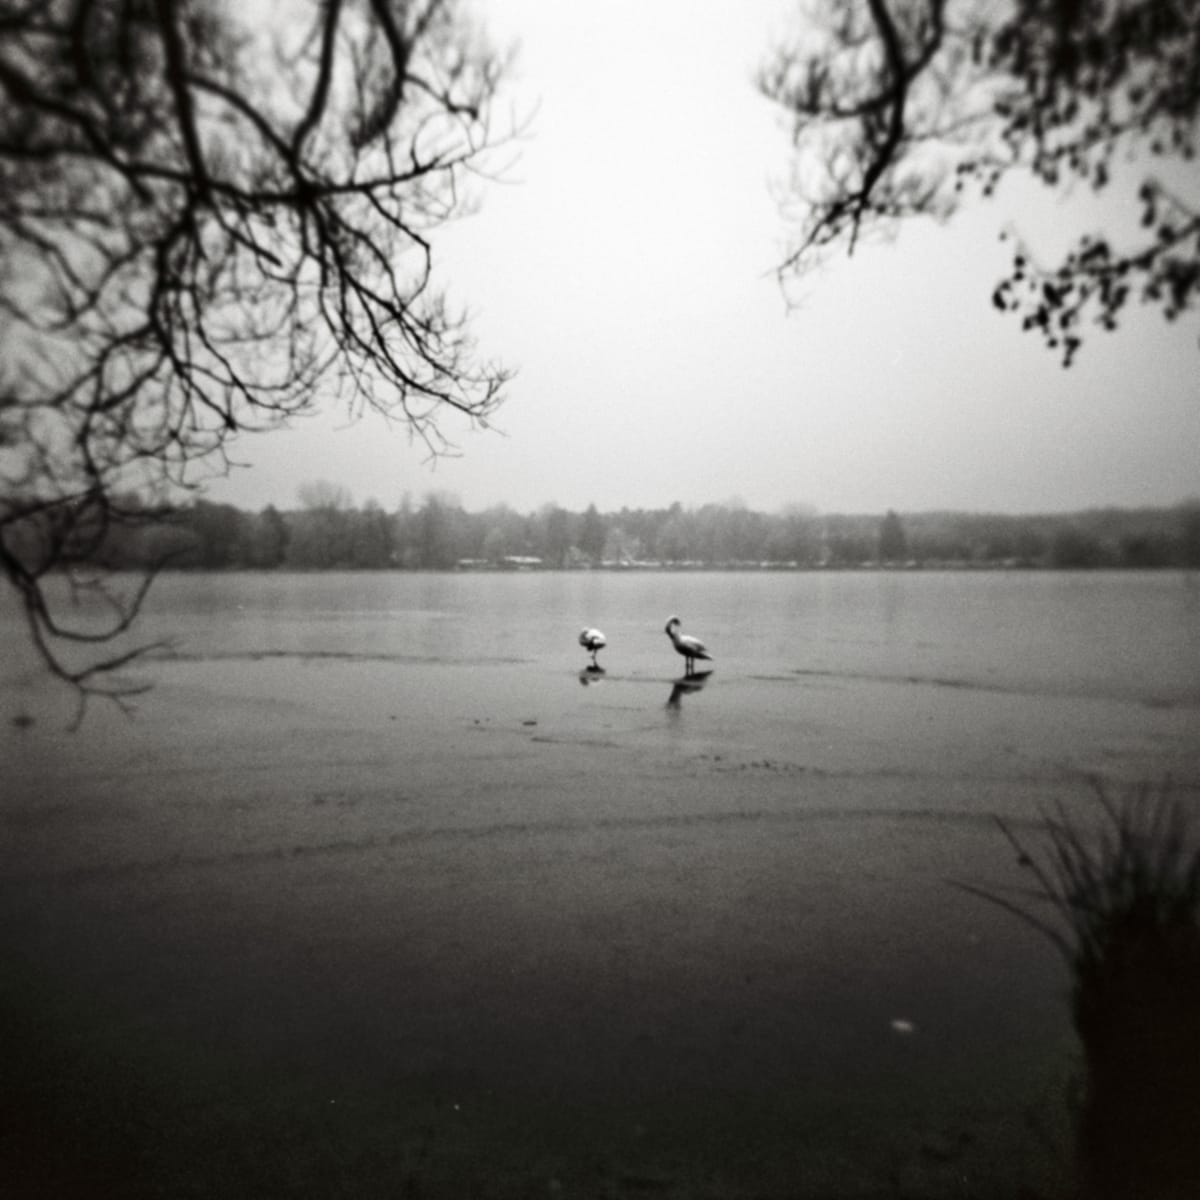 Ice on the Pond by Rolf Florschuetz  Image: Analog on Film